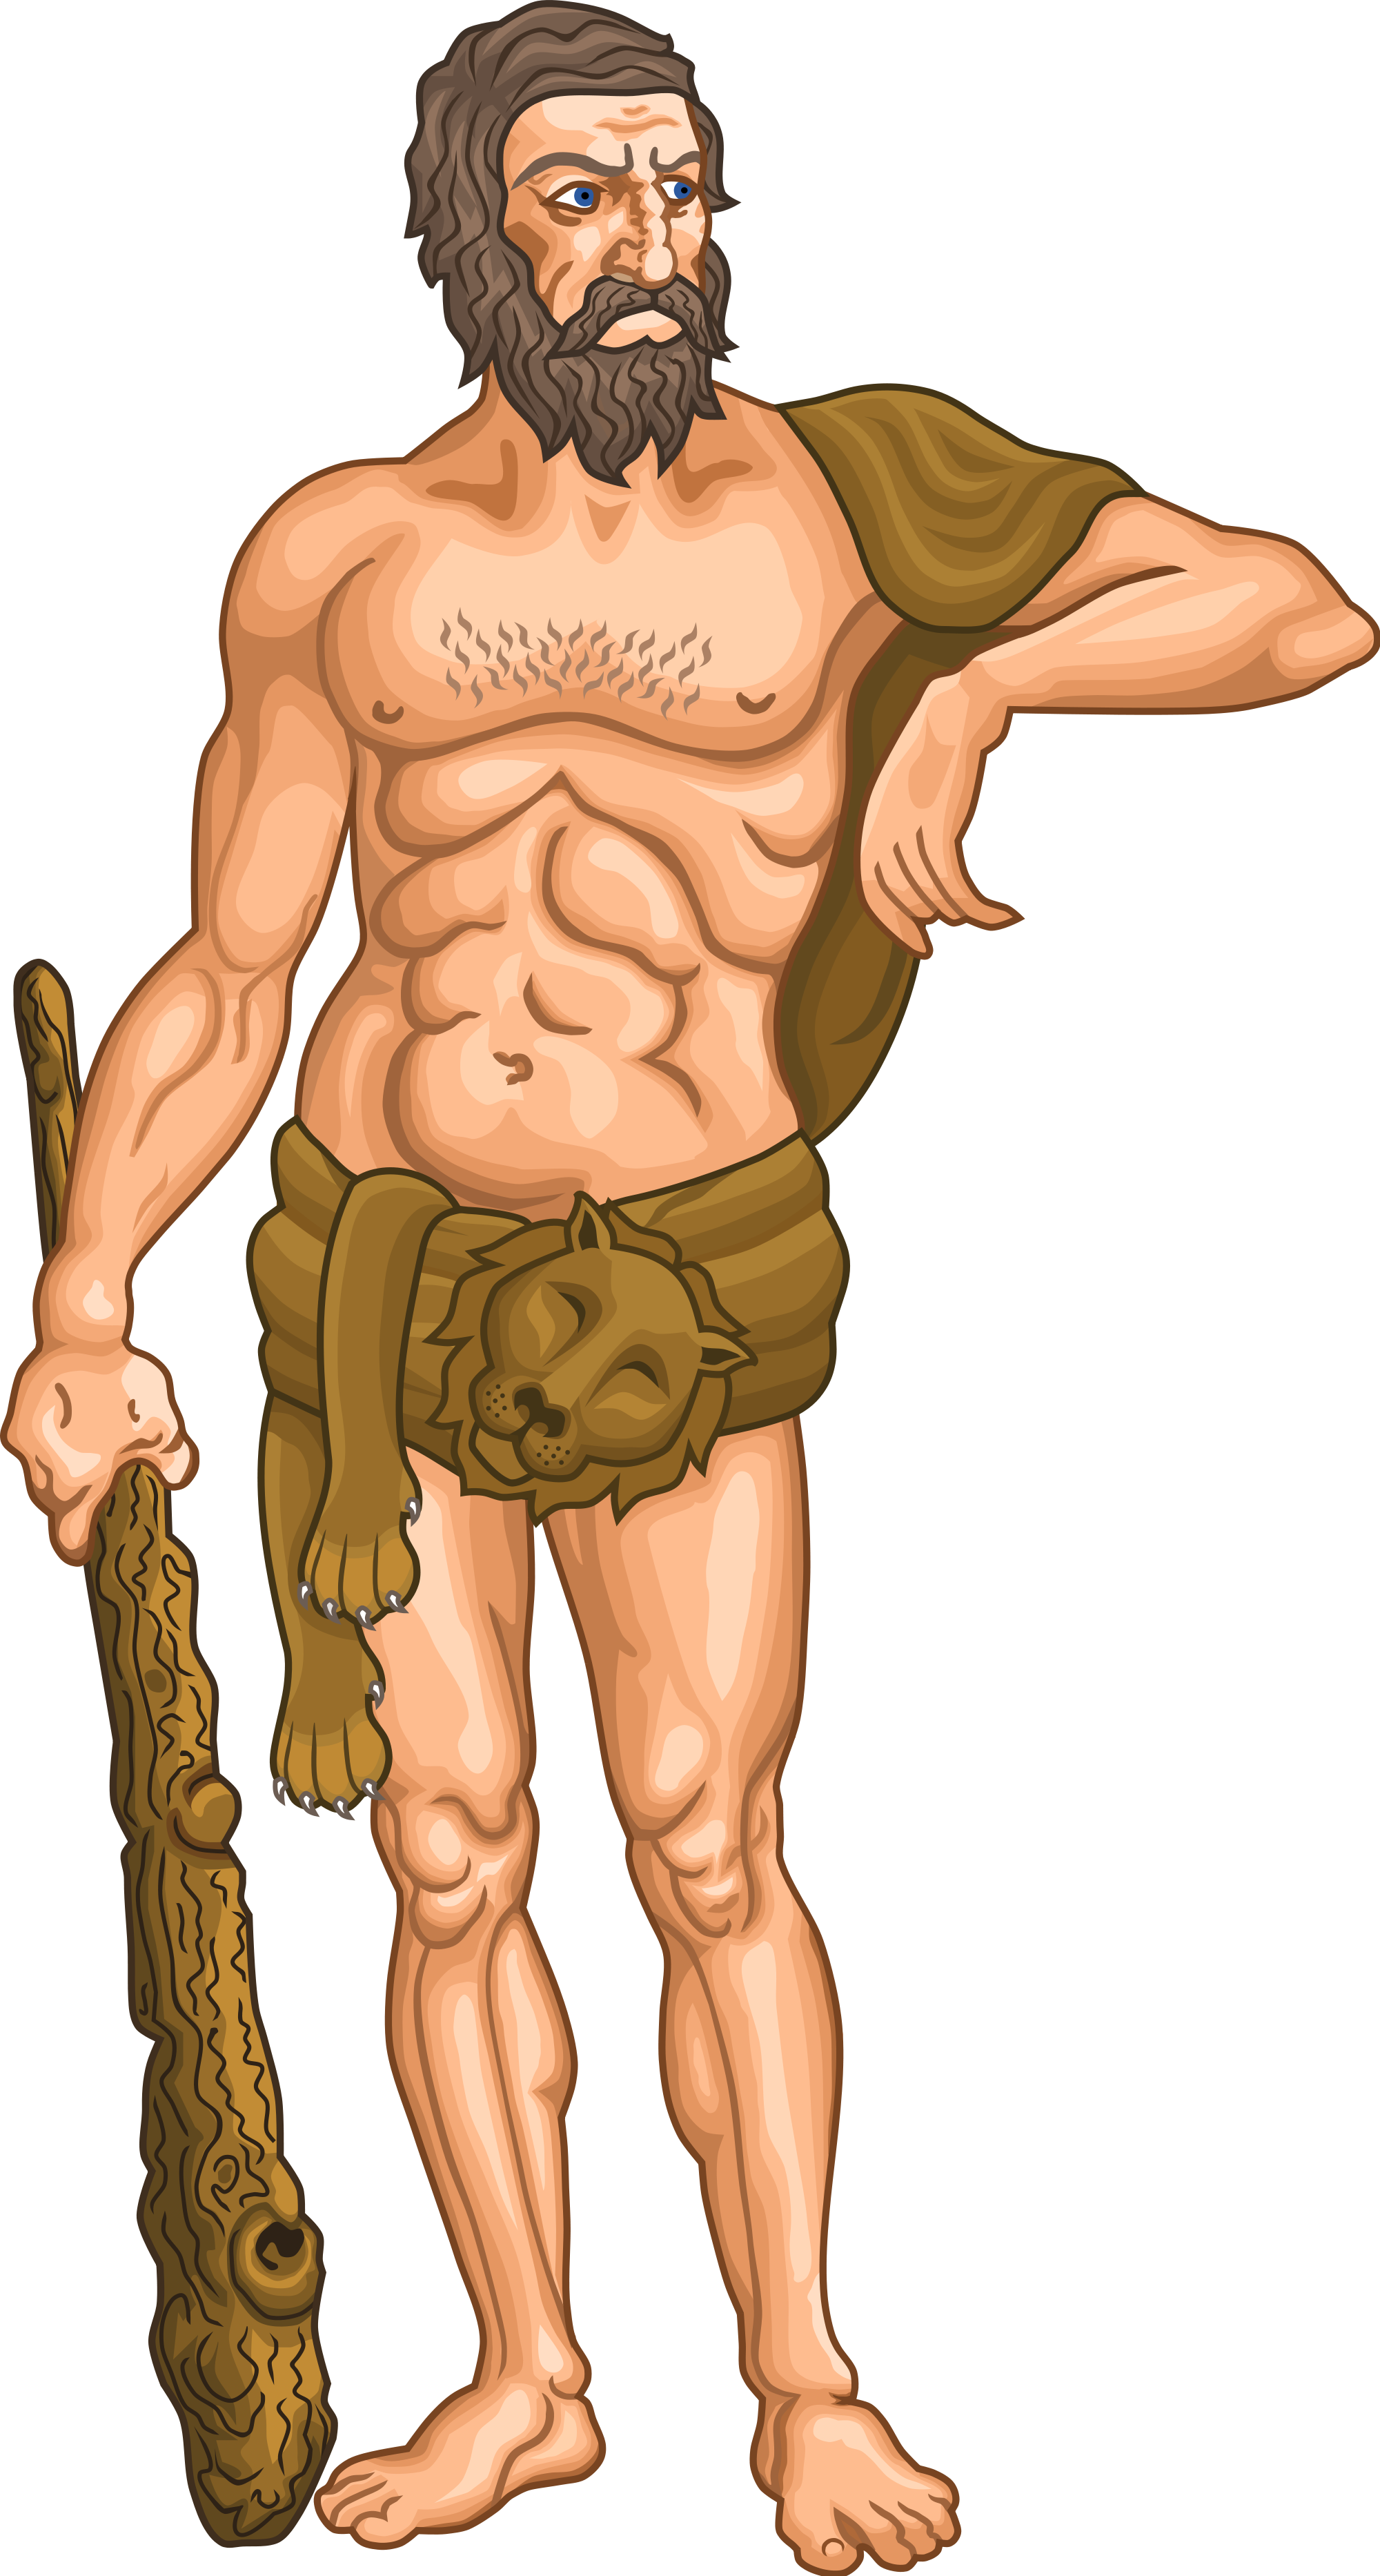 Hercules PNG Image Background